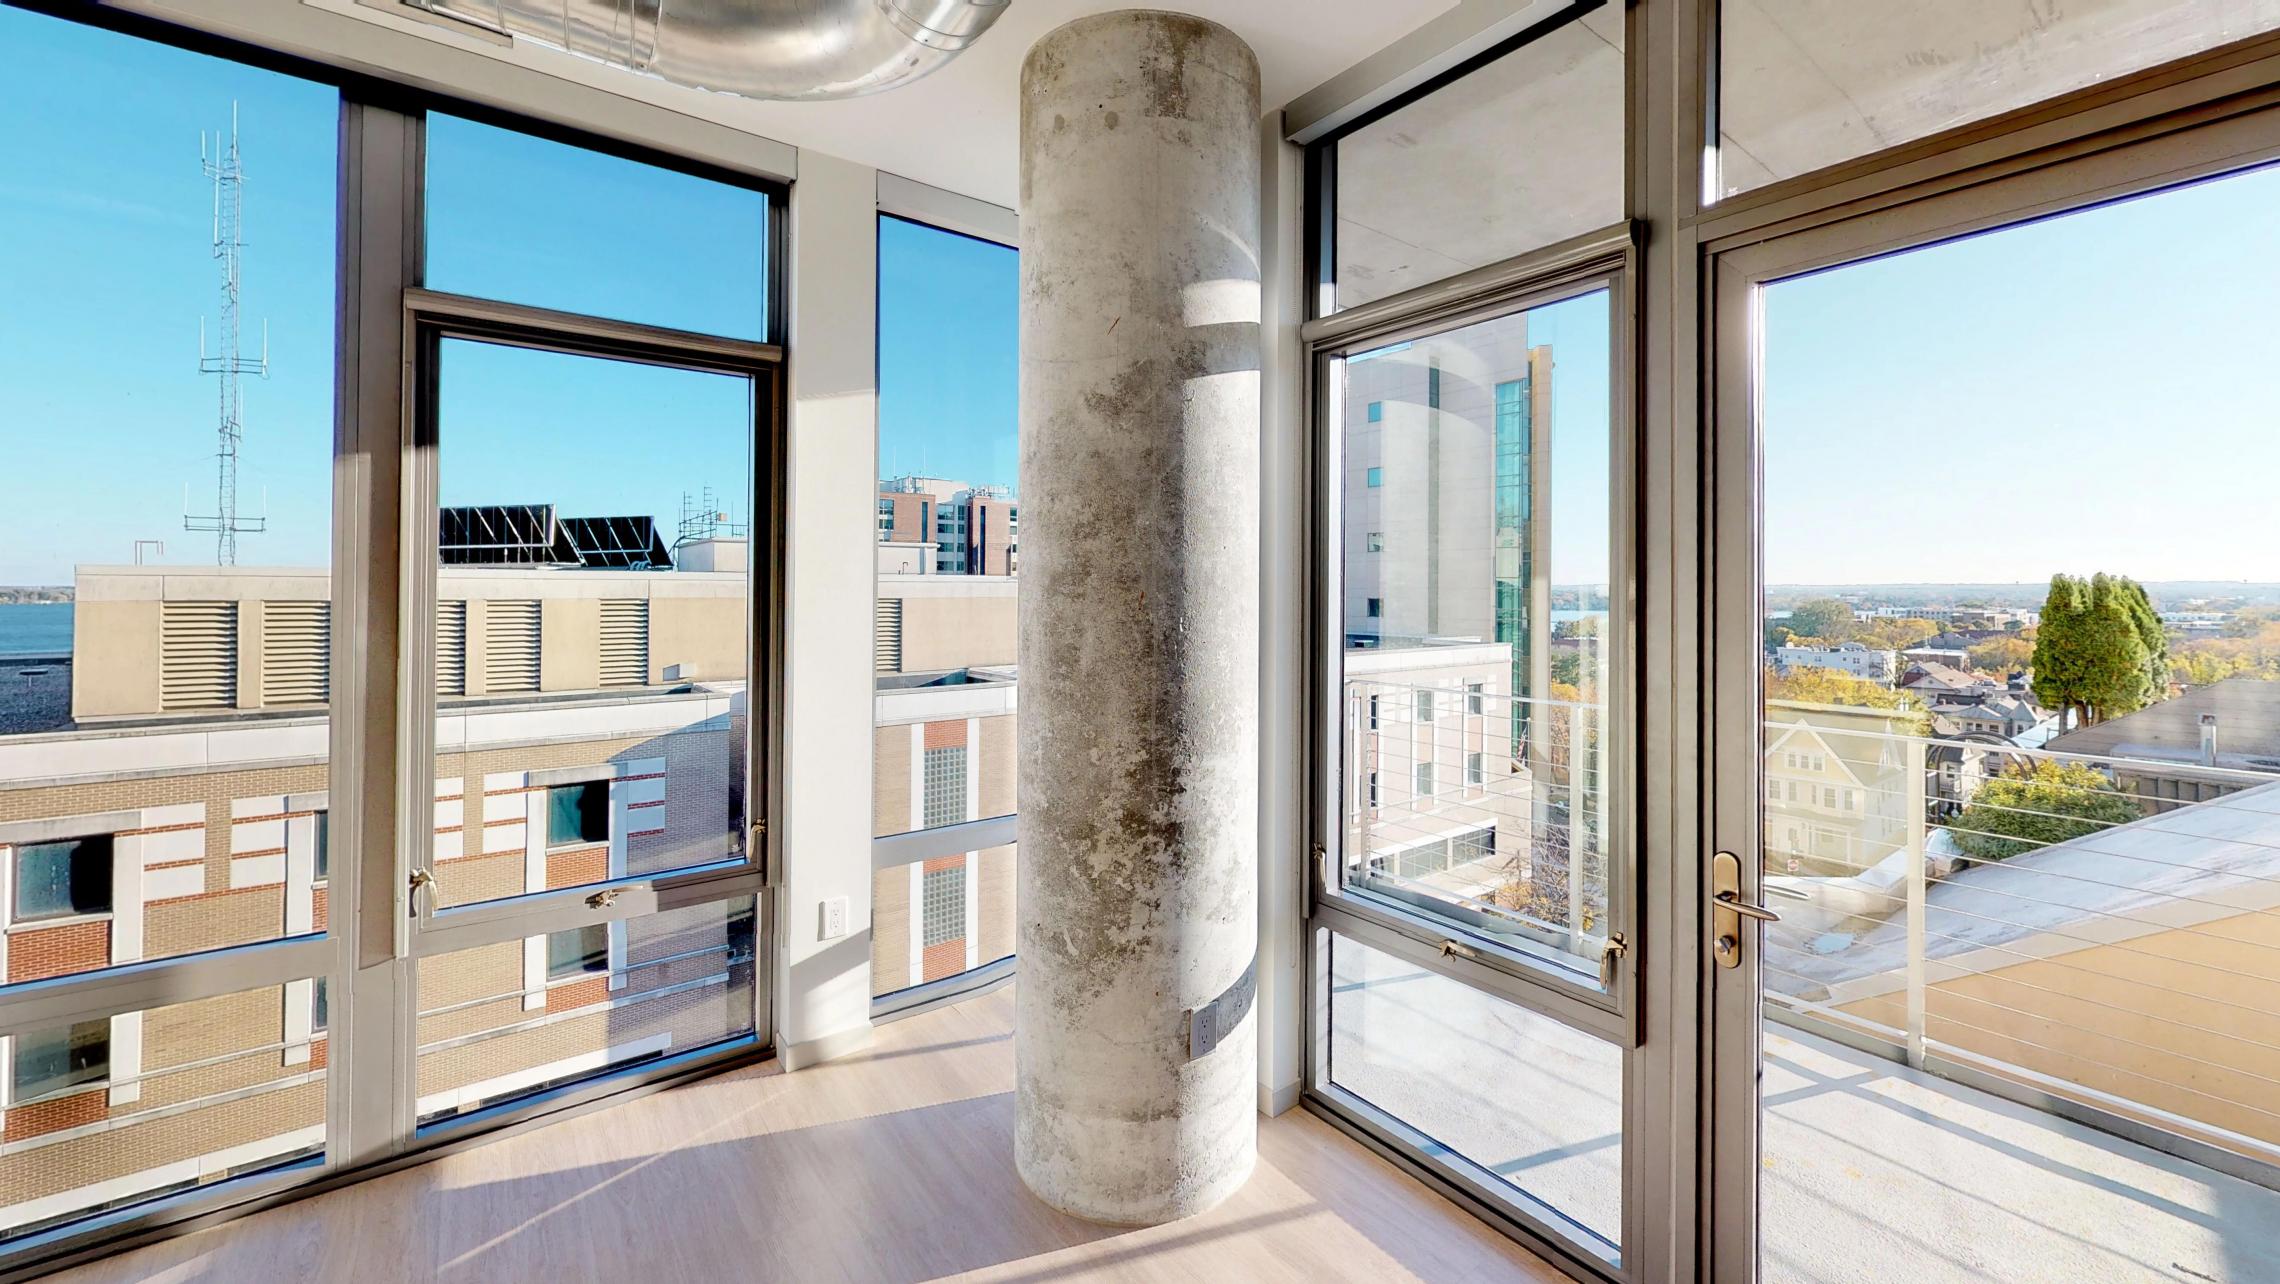 The-Pressman-Apartment-513-One-Bedroom-Living-Room-View-Kitchen-Island-Downtown-Madison-Capitol-Balcony-Views.jpg